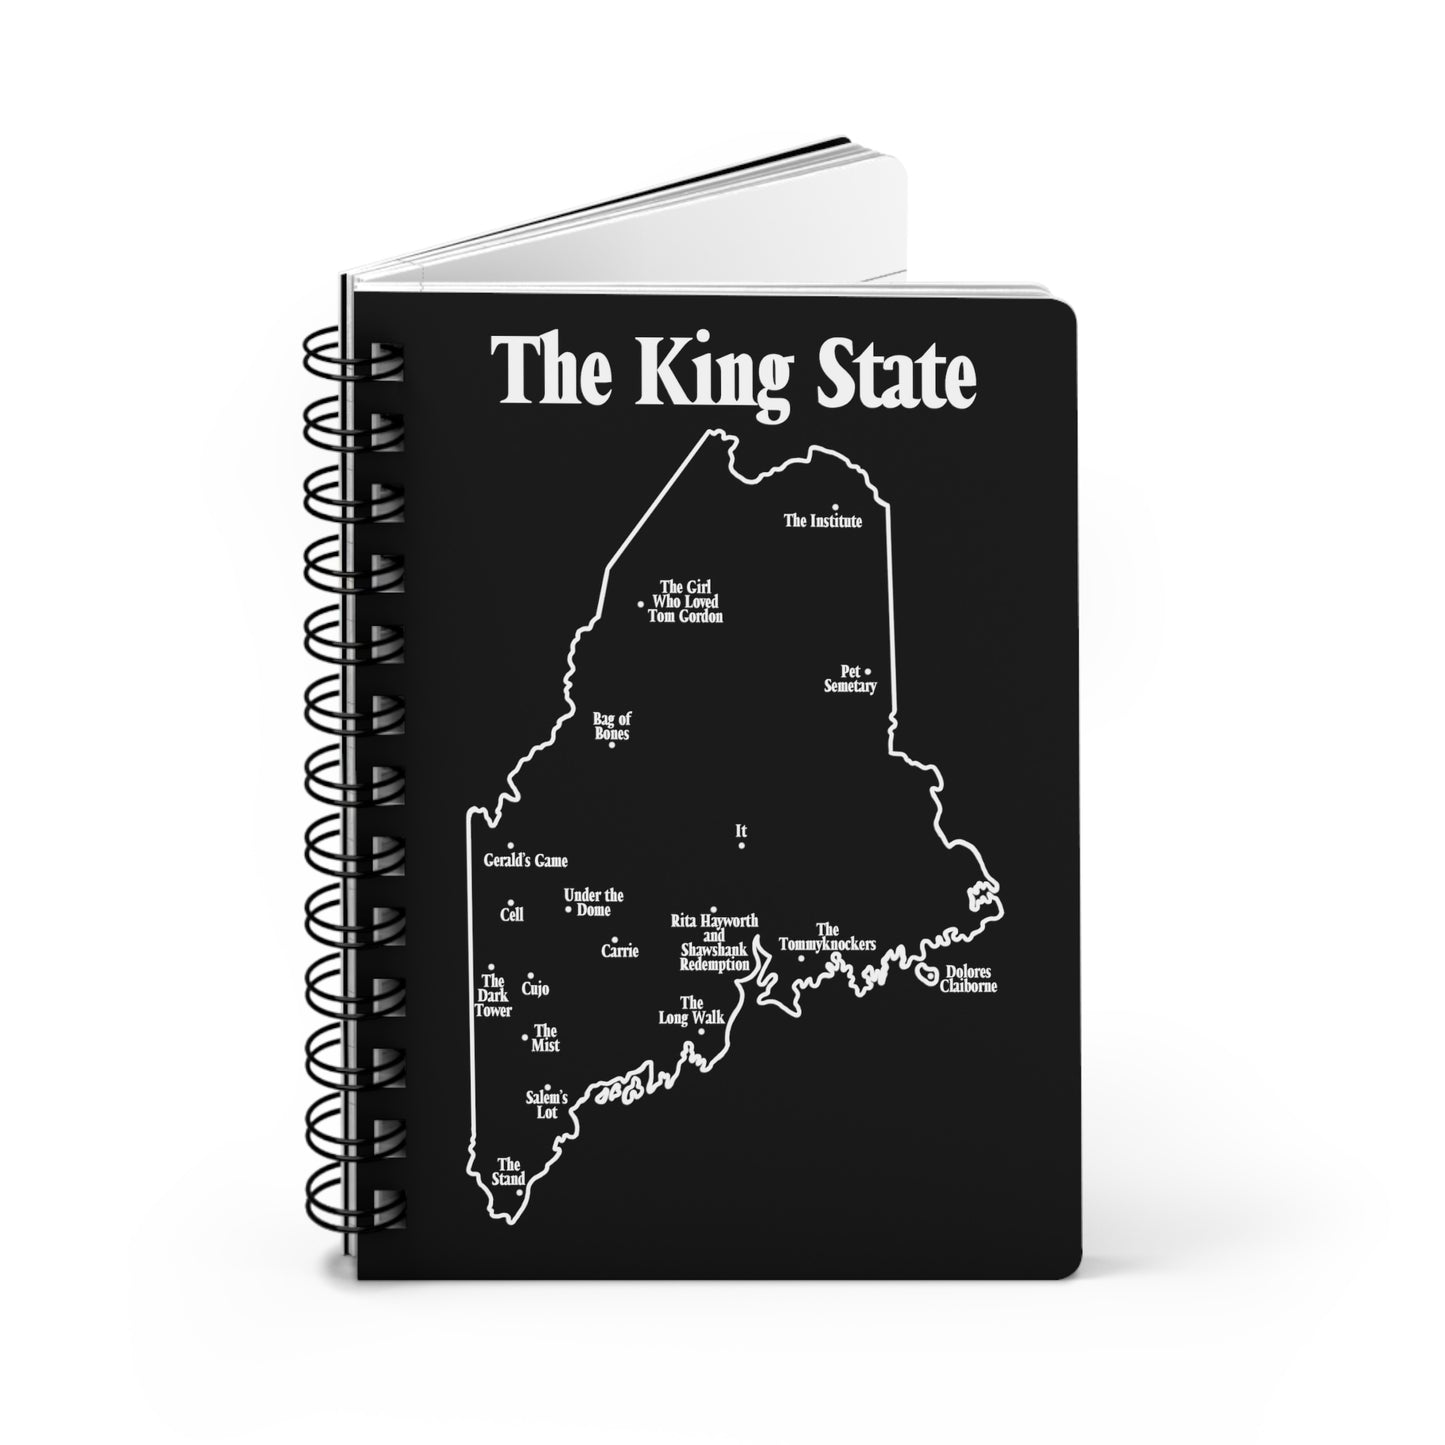 The King State Spiral Bound Notebook